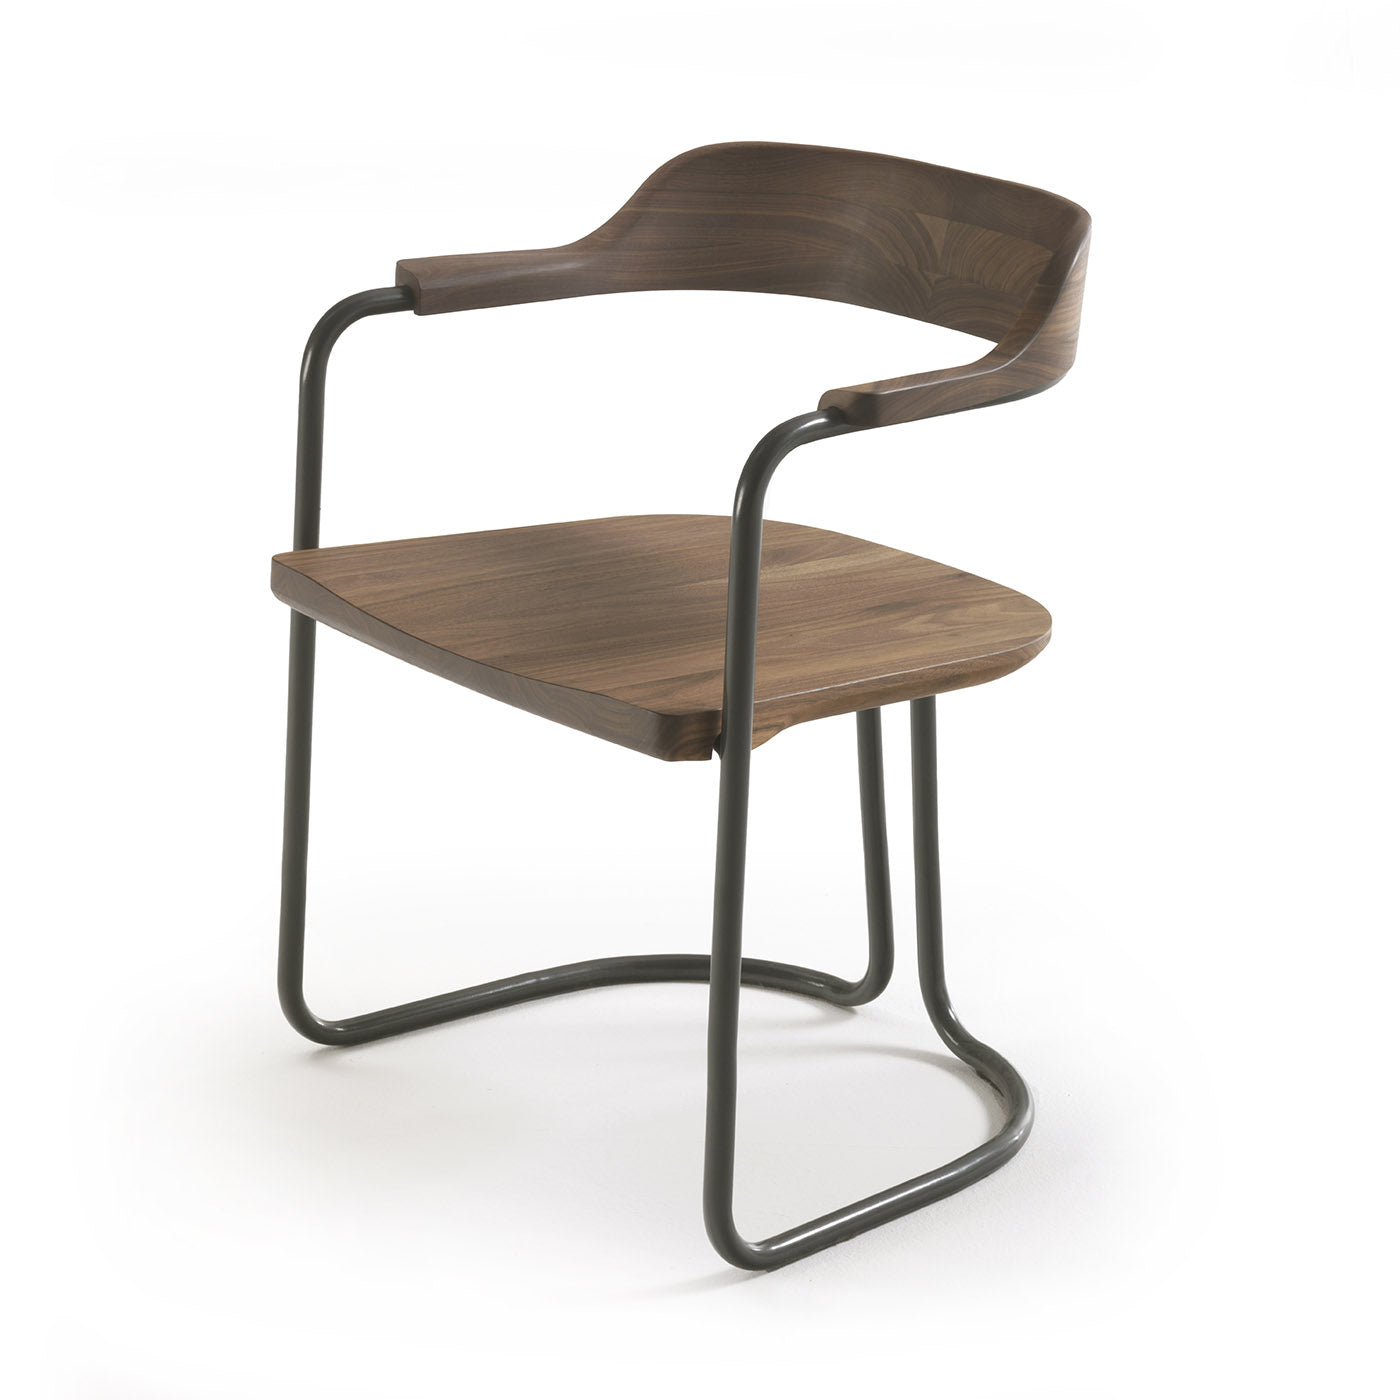 Tubular Anthracite-Gray Chair by Jamie Durie - Alternative view 4